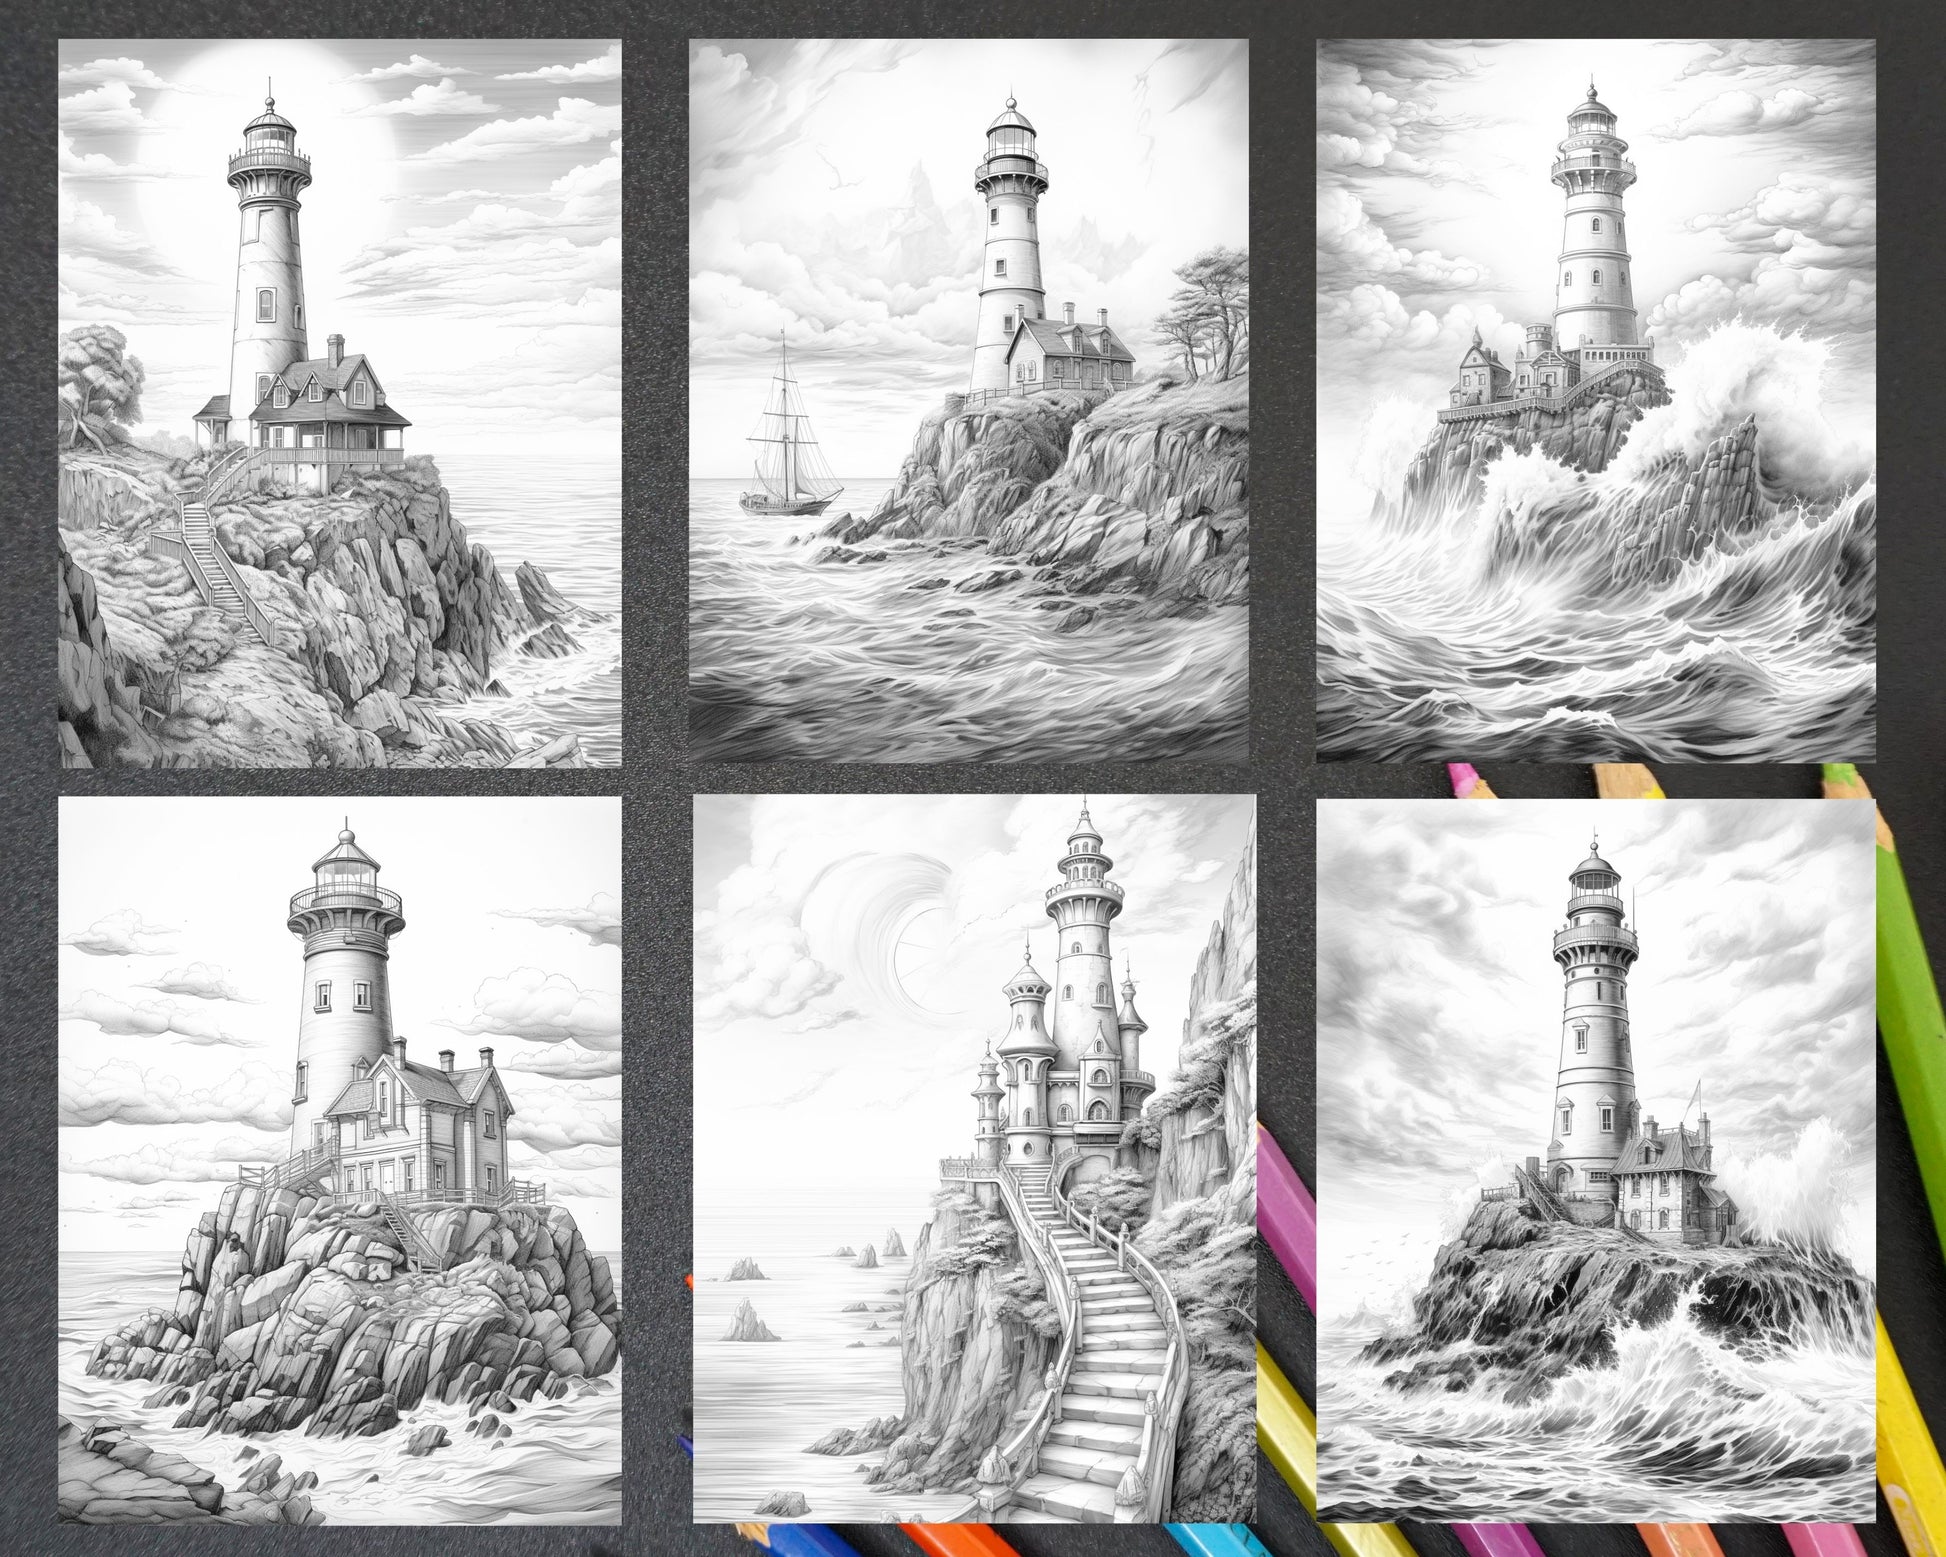 Majestic Lighthouse Grayscale Coloring Page, Coastal Art Therapy Coloring Sheet, Detailed Nautical Adult Coloring Printable, Ocean-themed DIY Coloring Page, Nautical Decor Coloring Sheet, Lighthouse Scene Coloring Illustration, Grayscale Relaxation Coloring Page